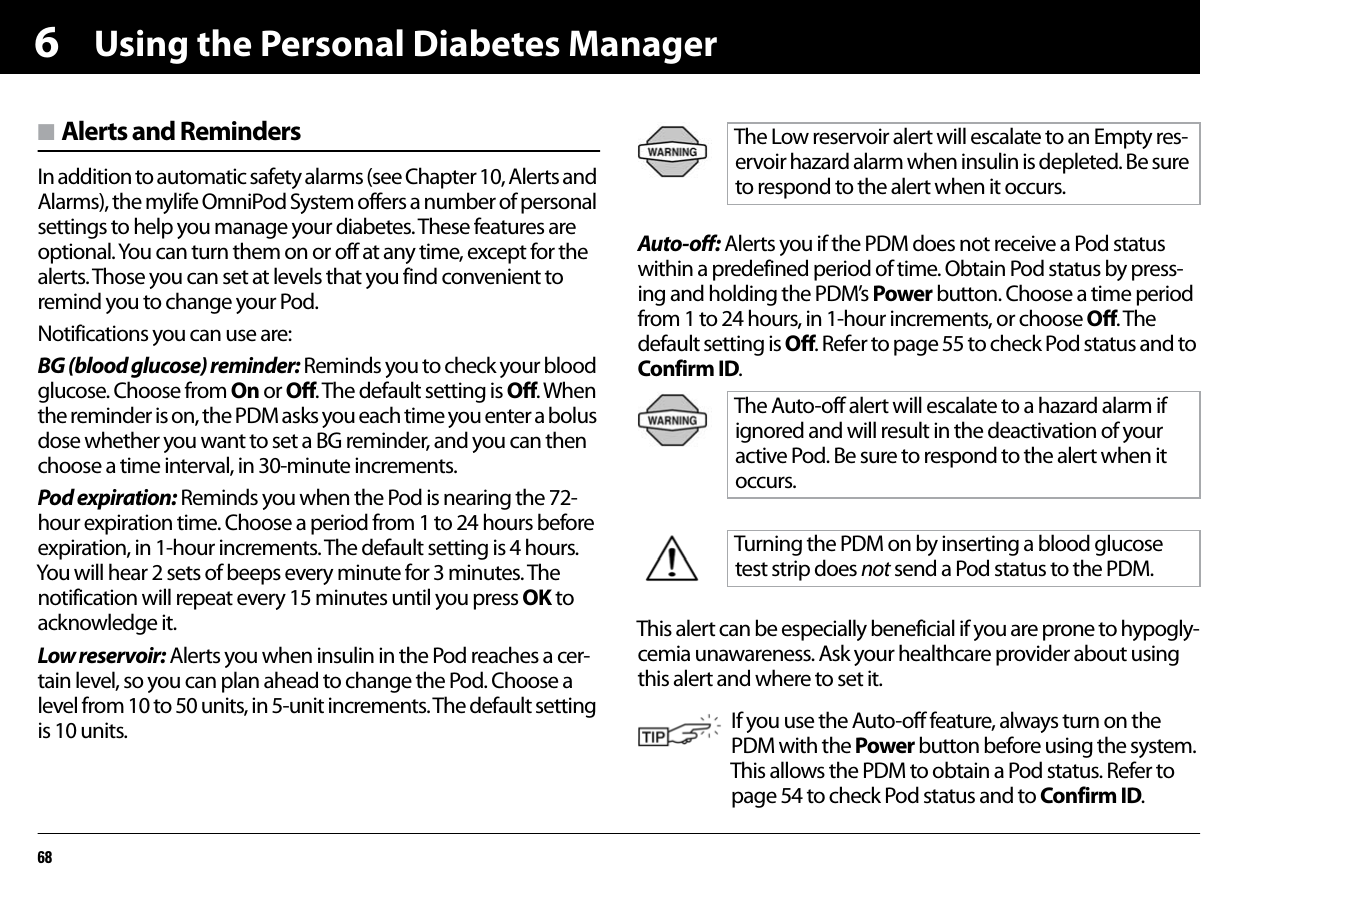 Using the Personal Diabetes Manager686n Alerts and RemindersIn addition to automatic safety alarms (see Chapter 10, Alerts and Alarms), the mylife OmniPod System offers a number of personal settings to help you manage your diabetes. These features are optional. You can turn them on or off at any time, except for the alerts. Those you can set at levels that you find convenient to remind you to change your Pod. Notifications you can use are:BG (blood glucose) reminder: Reminds you to check your blood glucose. Choose from On or Off. The default setting is Off. When the reminder is on, the PDM asks you each time you enter a bolus dose whether you want to set a BG reminder, and you can then choose a time interval, in 30-minute increments.Pod expiration: Reminds you when the Pod is nearing the 72-hour expiration time. Choose a period from 1 to 24 hours before expiration, in 1-hour increments. The default setting is 4 hours. You will hear 2 sets of beeps every minute for 3 minutes. The notification will repeat every 15 minutes until you press OK to acknowledge it. Low reservoir: Alerts you when insulin in the Pod reaches a cer-tain level, so you can plan ahead to change the Pod. Choose a level from 10 to 50 units, in 5-unit increments. The default setting is 10 units.Auto-off: Alerts you if the PDM does not receive a Pod status within a predefined period of time. Obtain Pod status by press-ing and holding the PDM’s Power button. Choose a time period from 1 to 24 hours, in 1-hour increments, or choose Off. The default setting is Off. Refer to page 55 to check Pod status and to Confirm ID.      This alert can be especially beneficial if you are prone to hypogly-cemia unawareness. Ask your healthcare provider about using this alert and where to set it.The Low reservoir alert will escalate to an Empty res-ervoir hazard alarm when insulin is depleted. Be sure to respond to the alert when it occurs.The Auto-off alert will escalate to a hazard alarm if ignored and will result in the deactivation of your active Pod. Be sure to respond to the alert when it occurs.Turning the PDM on by inserting a blood glucose test strip does not send a Pod status to the PDM.If you use the Auto-off feature, always turn on the PDM with the Power button before using the system. This allows the PDM to obtain a Pod status. Refer to page 54 to check Pod status and to Confirm ID. 